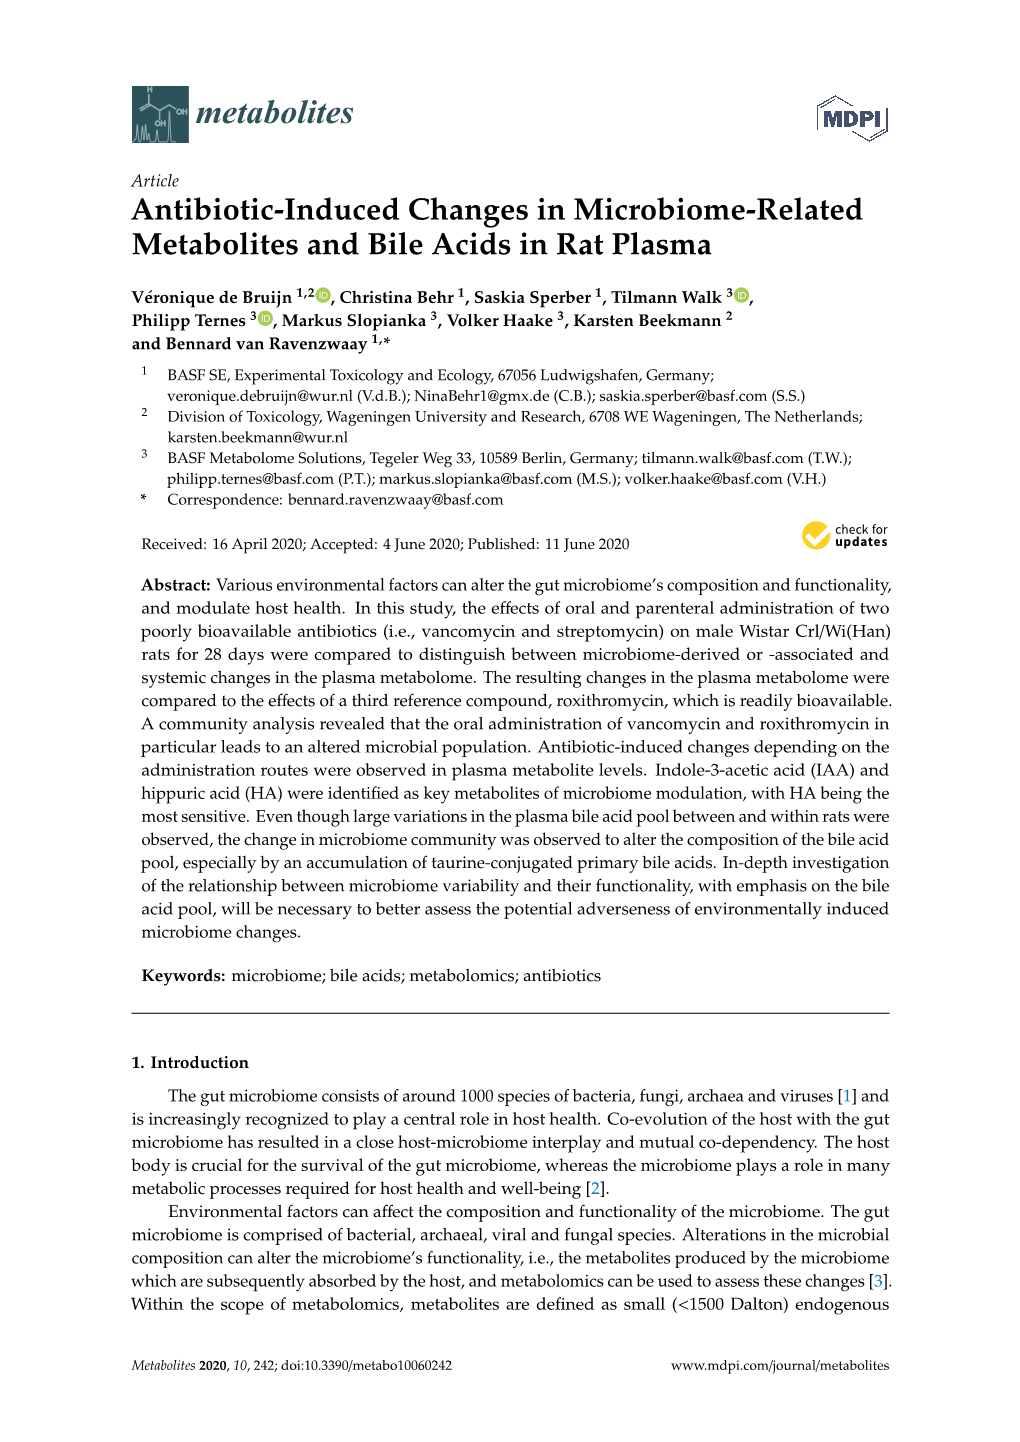 Antibiotic-Induced Changes in Microbiome-Related Metabolites and Bile Acids in Rat Plasma